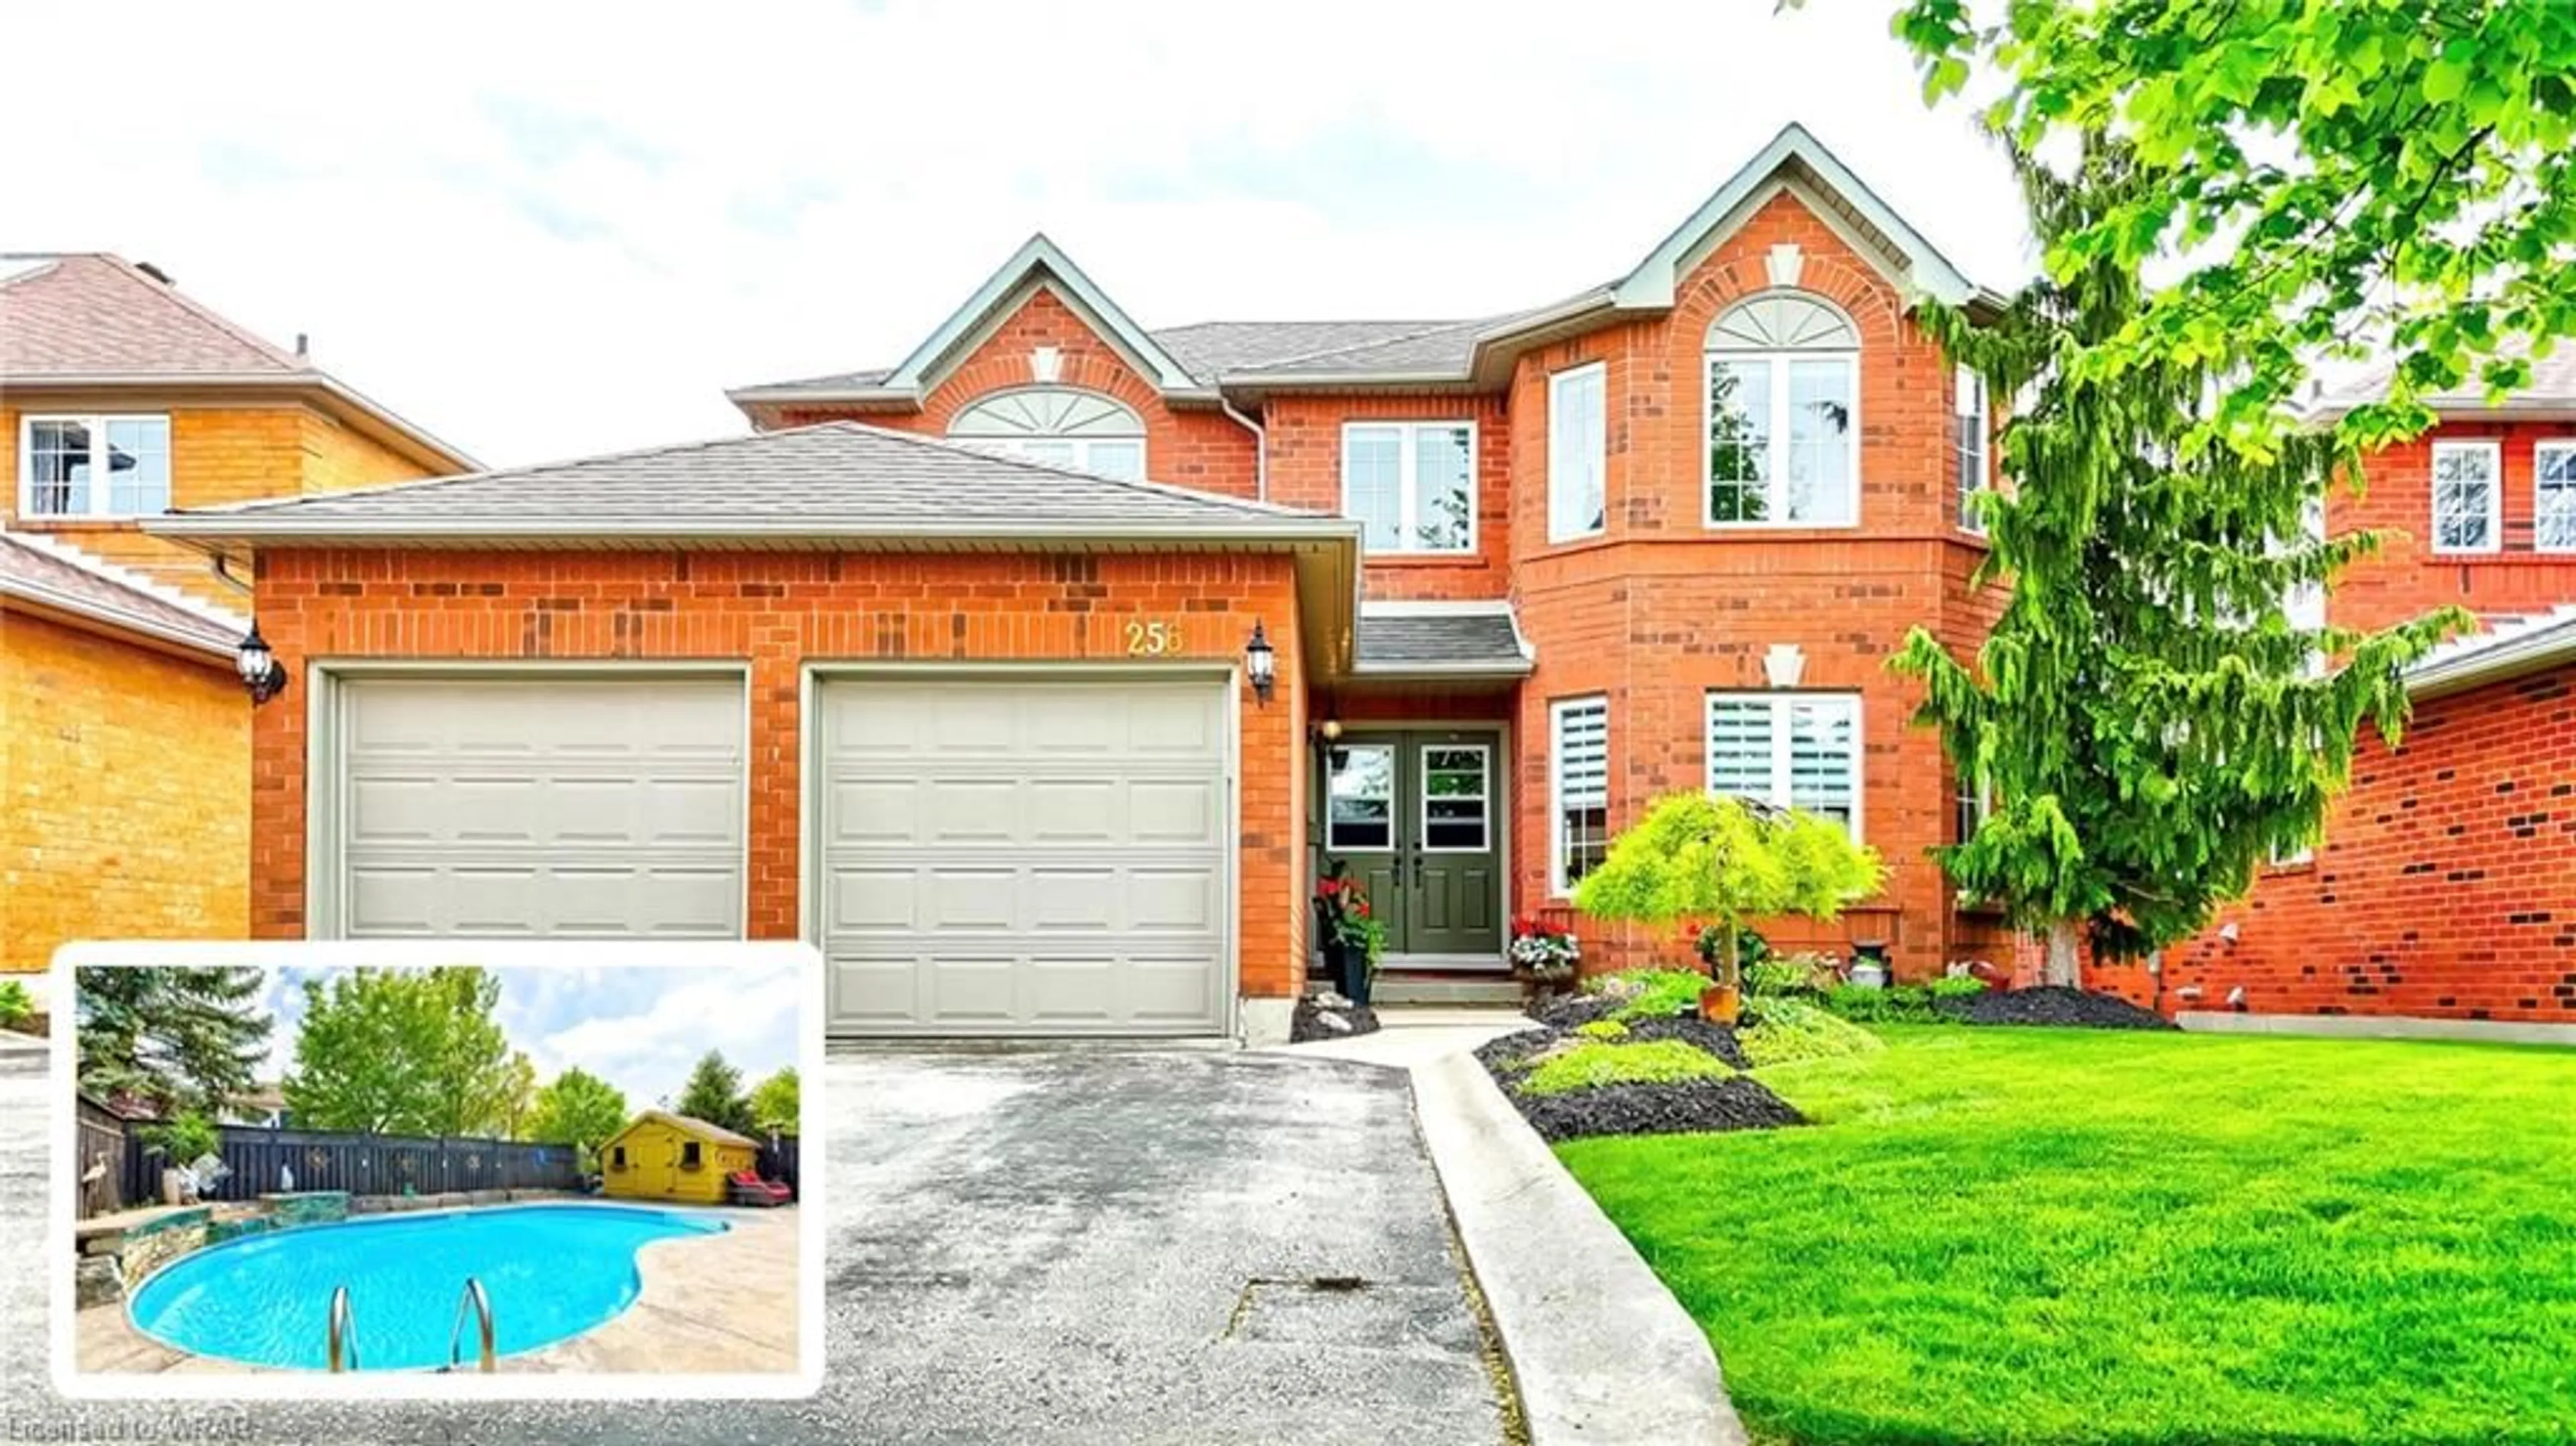 Home with brick exterior material for 256 Granite Hill Rd, Cambridge Ontario N1T 1X3